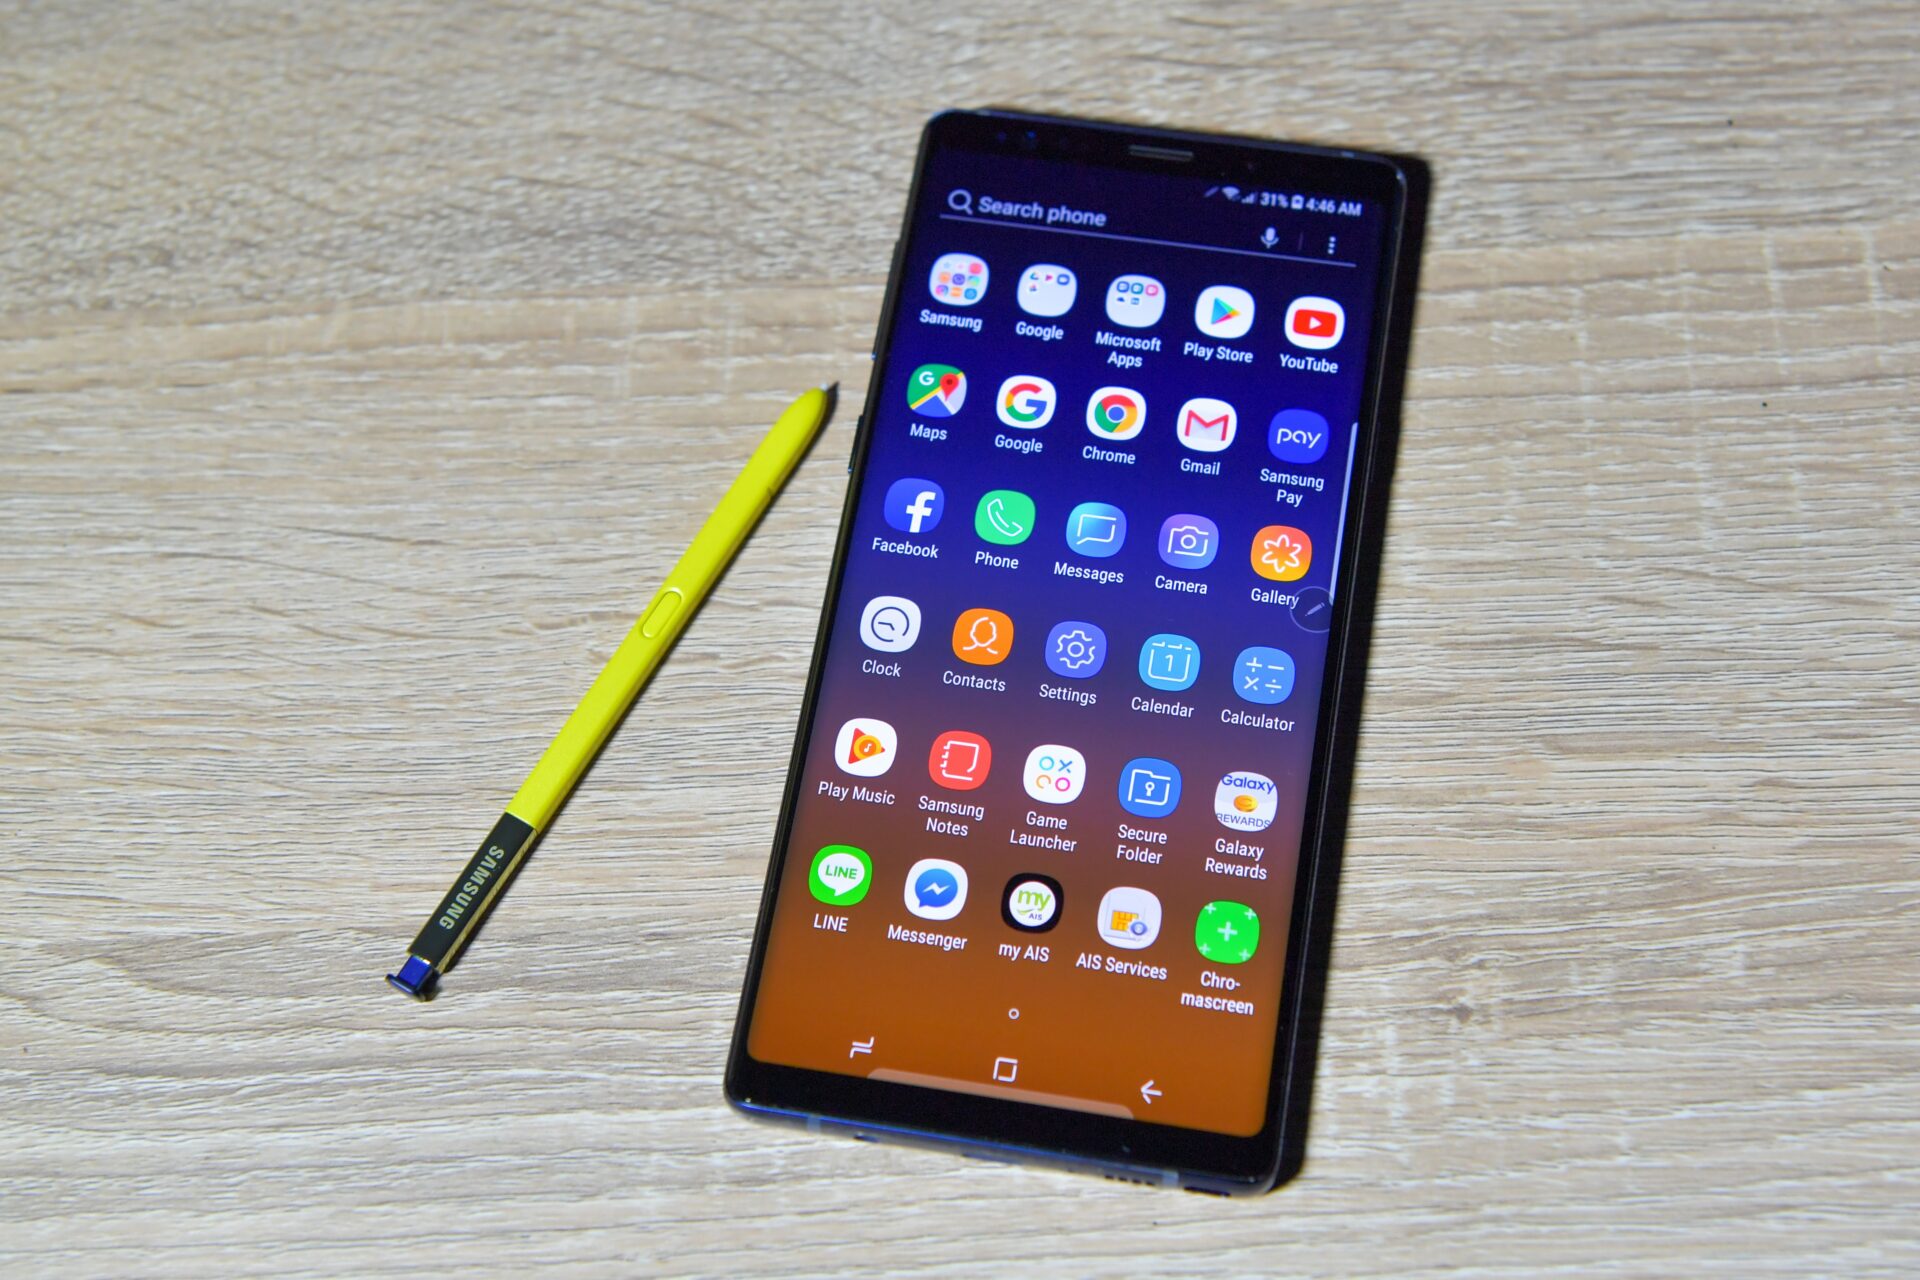 A woman alledges that her new Samsung Galaxy Note 9 caught fire after overheating